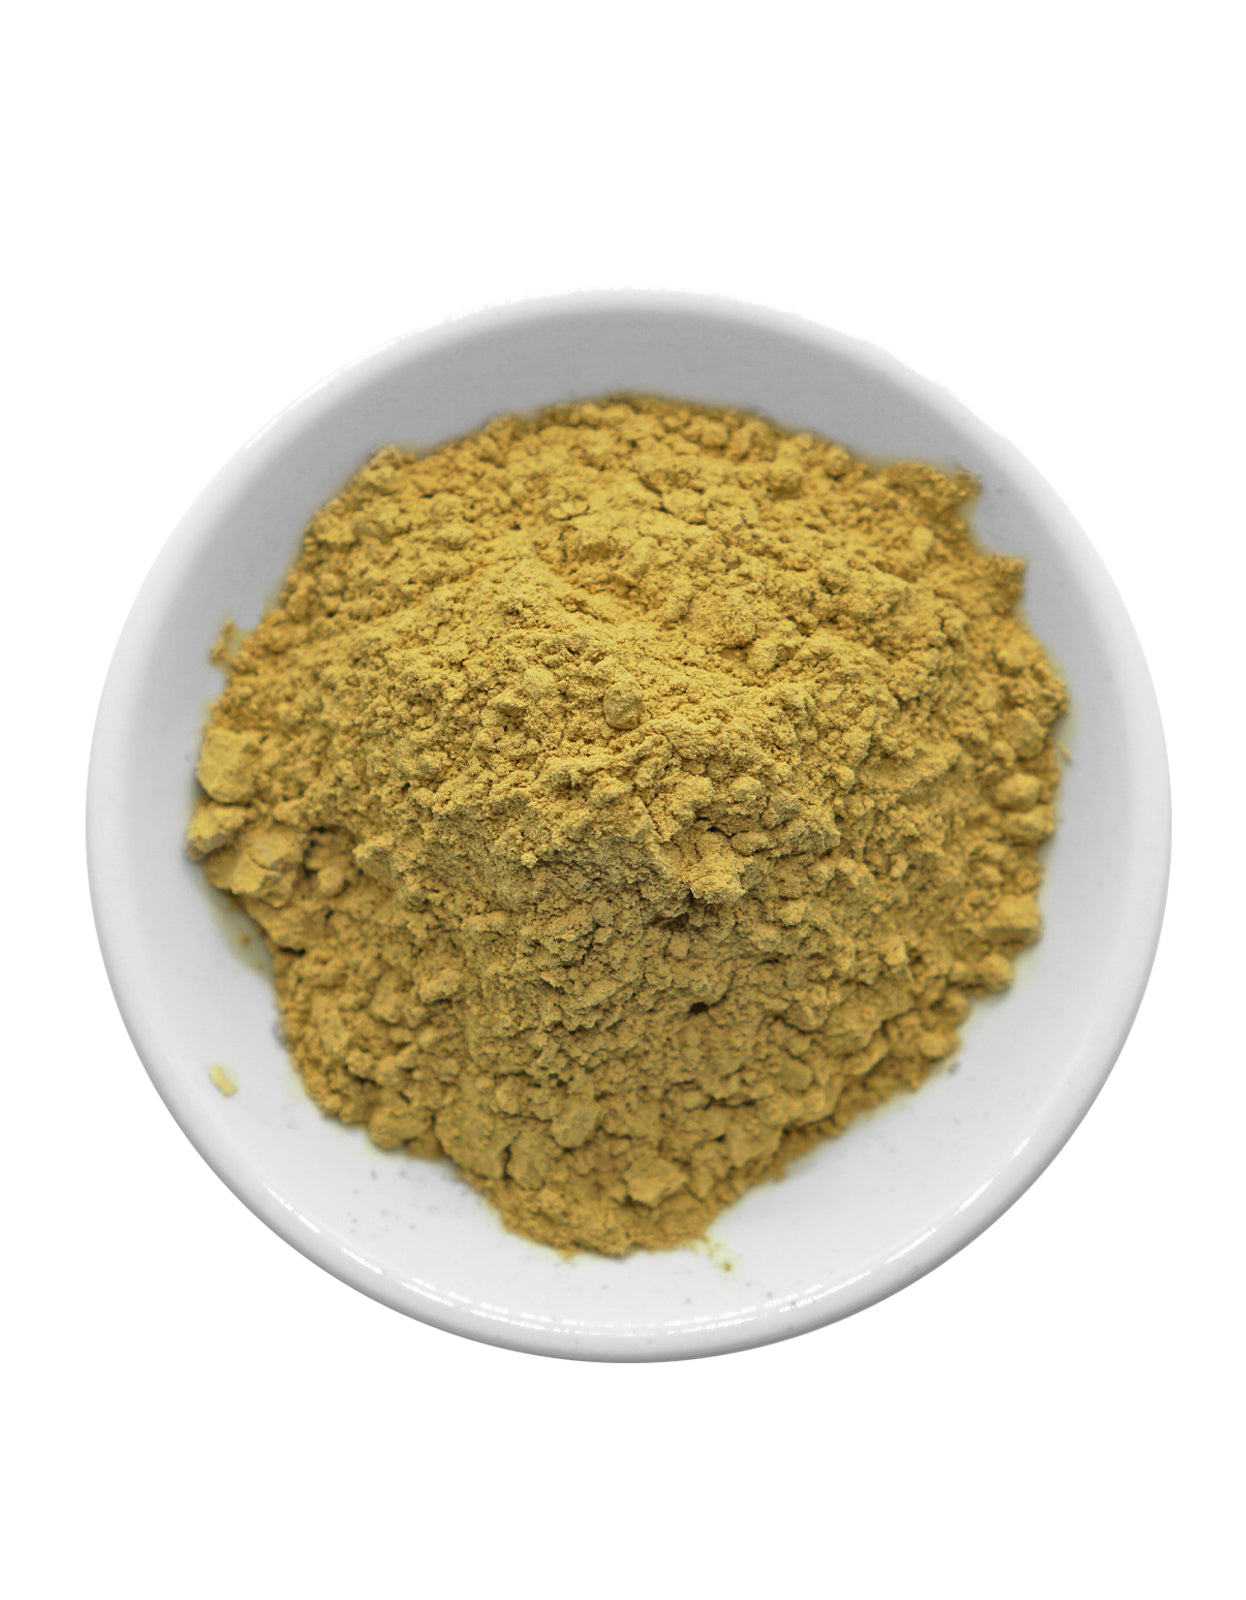 A bowl of our high quality low-temperature processed triphala powder